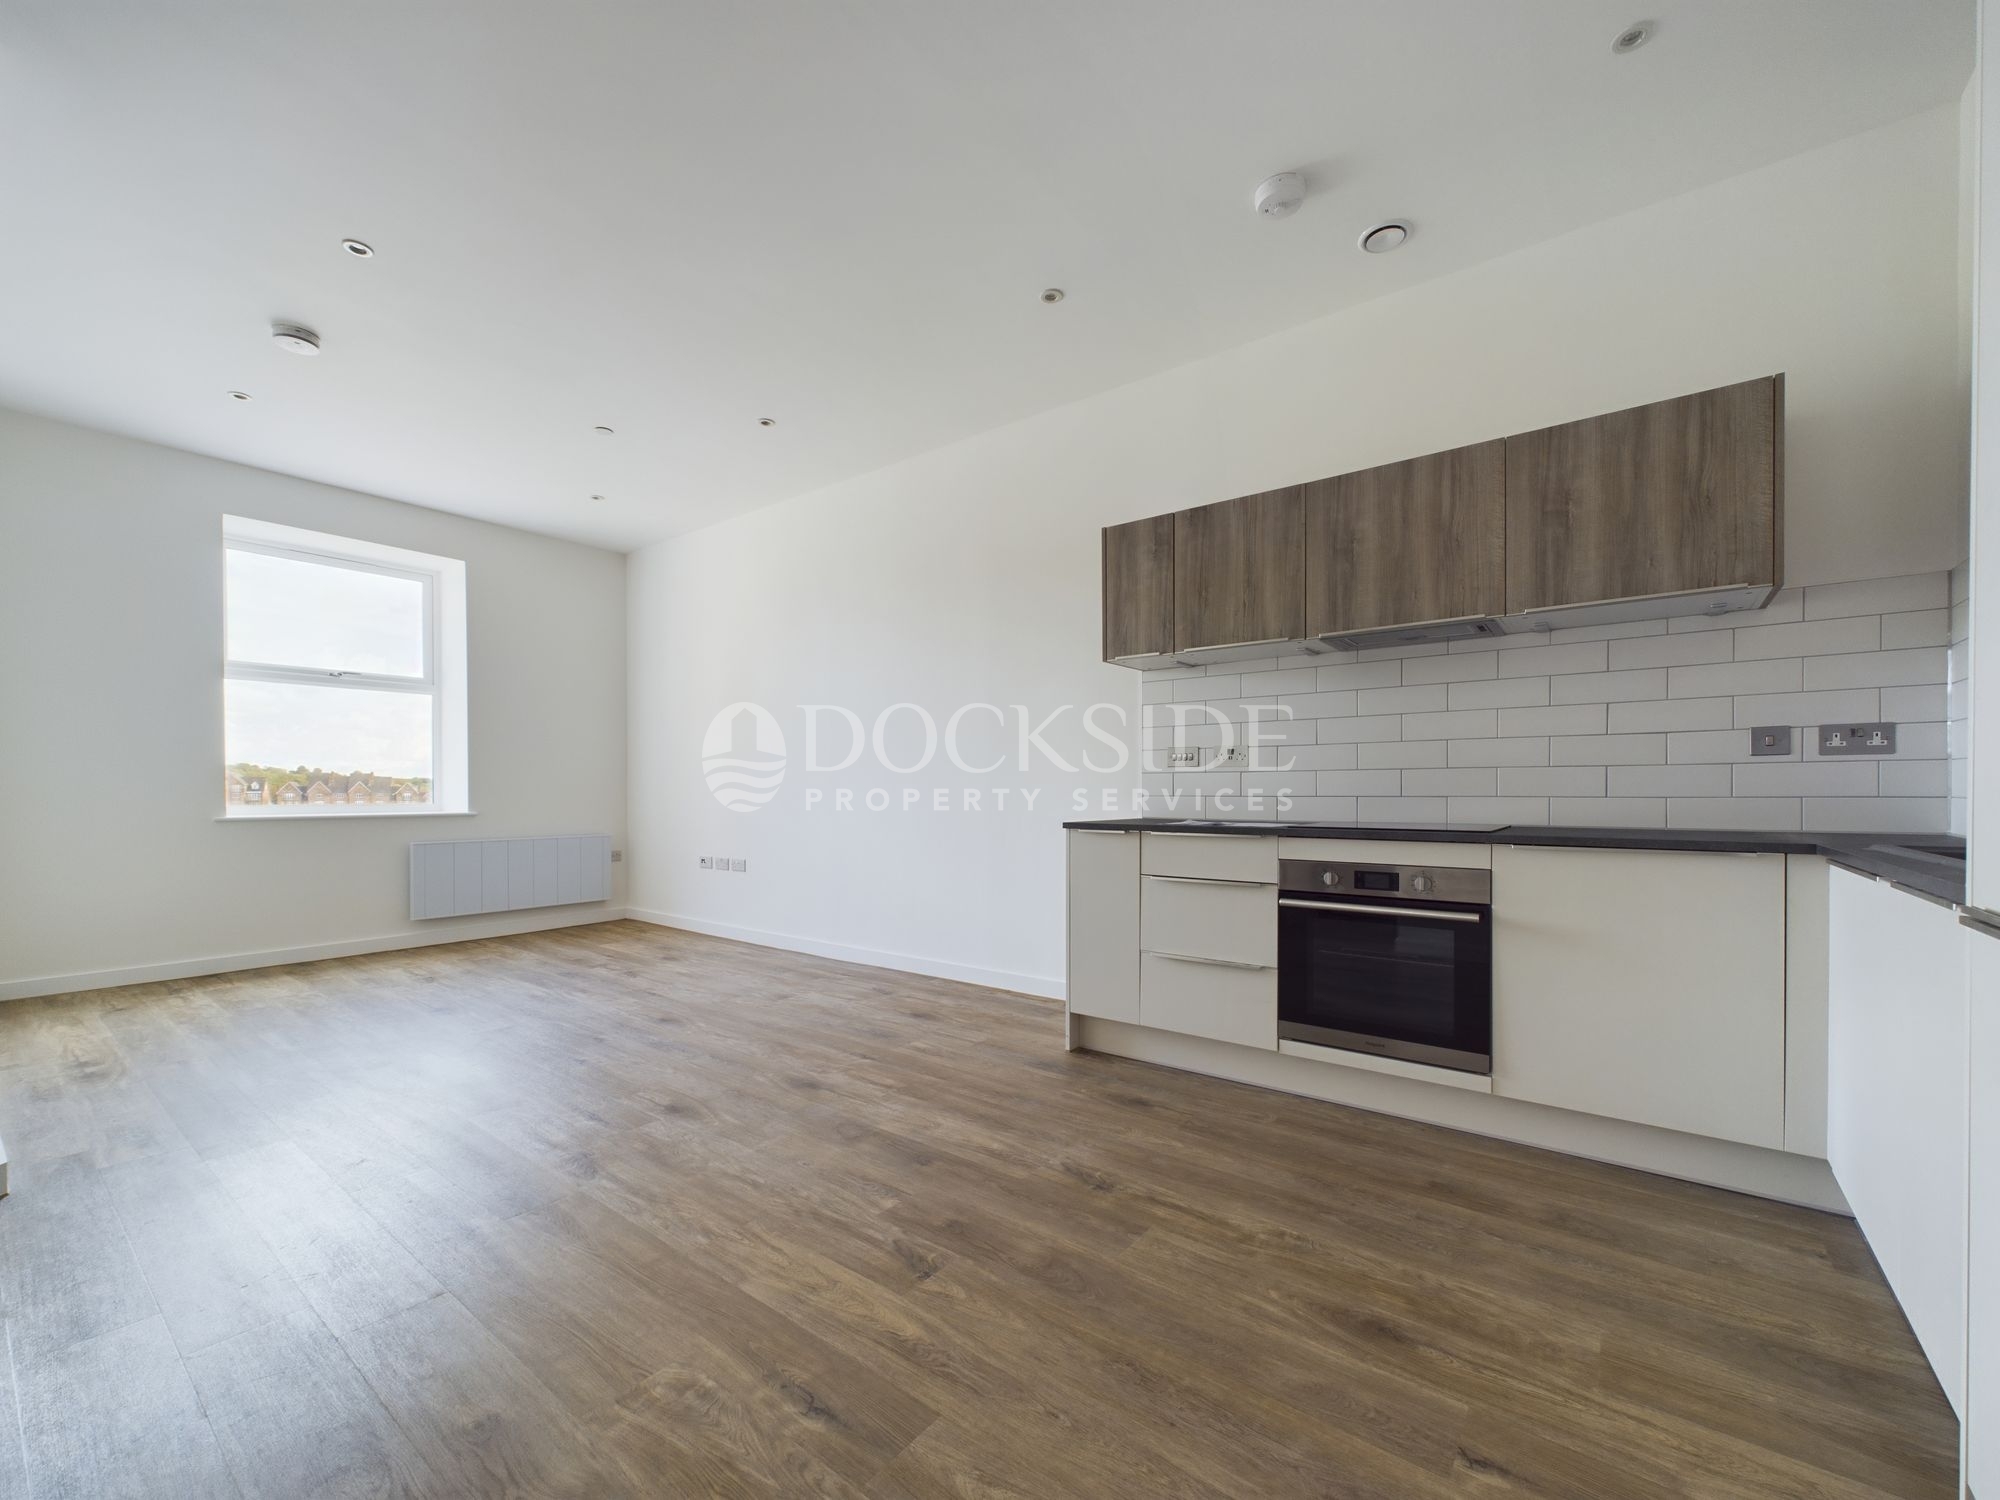 1 bed to rent in Chatham Maritime, Chatham  - Property Image 1